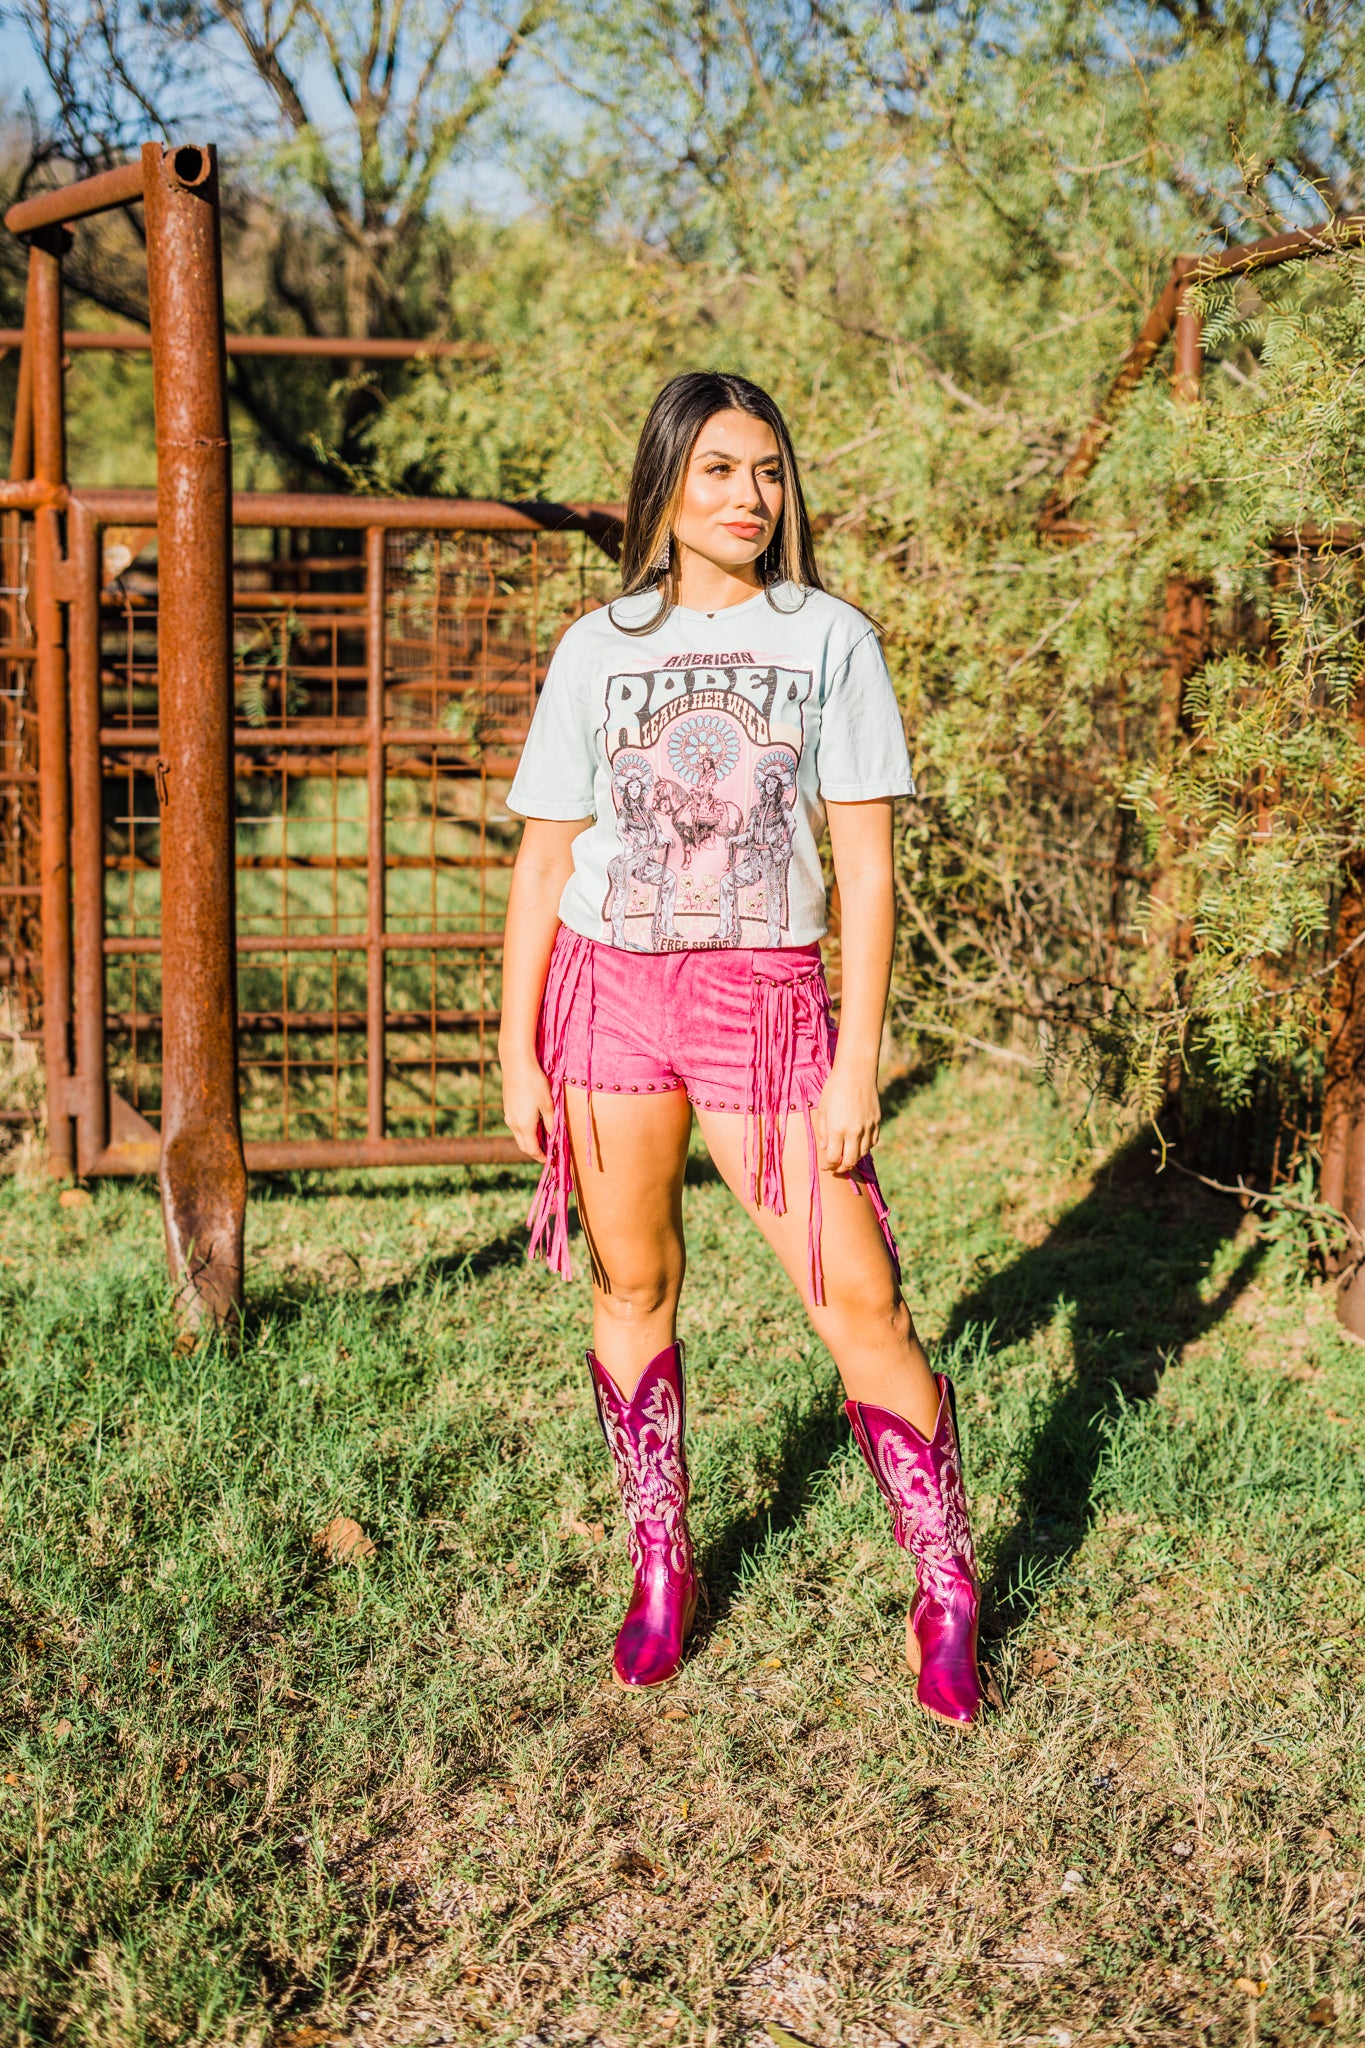 Rodeo Leave Her Wild T-shirt - Middle West Apparel